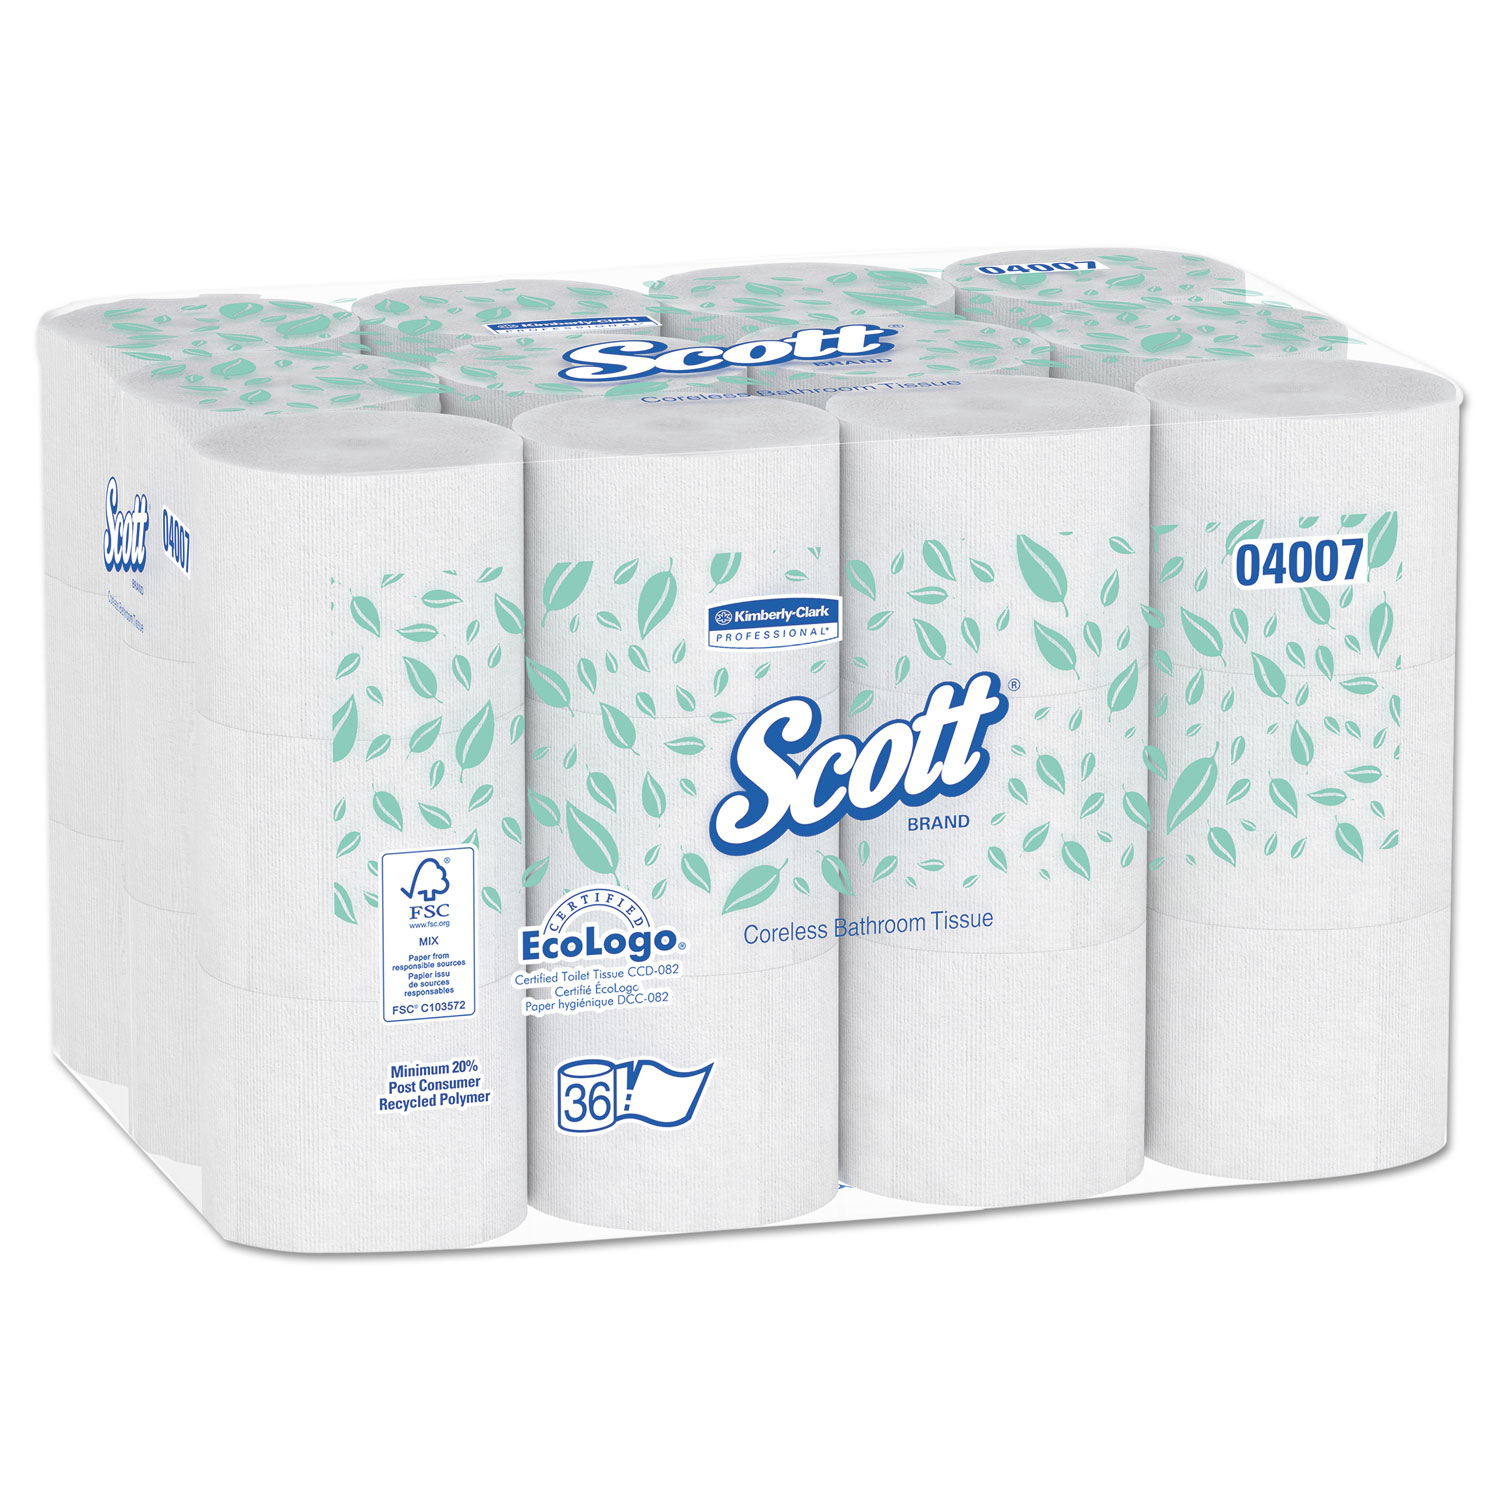 Scotts® Essential Coreless Standard Roll Toilet Tissue (SRB) - 2 Ply, 4" x 3.94", 1000 Count, 36/Case